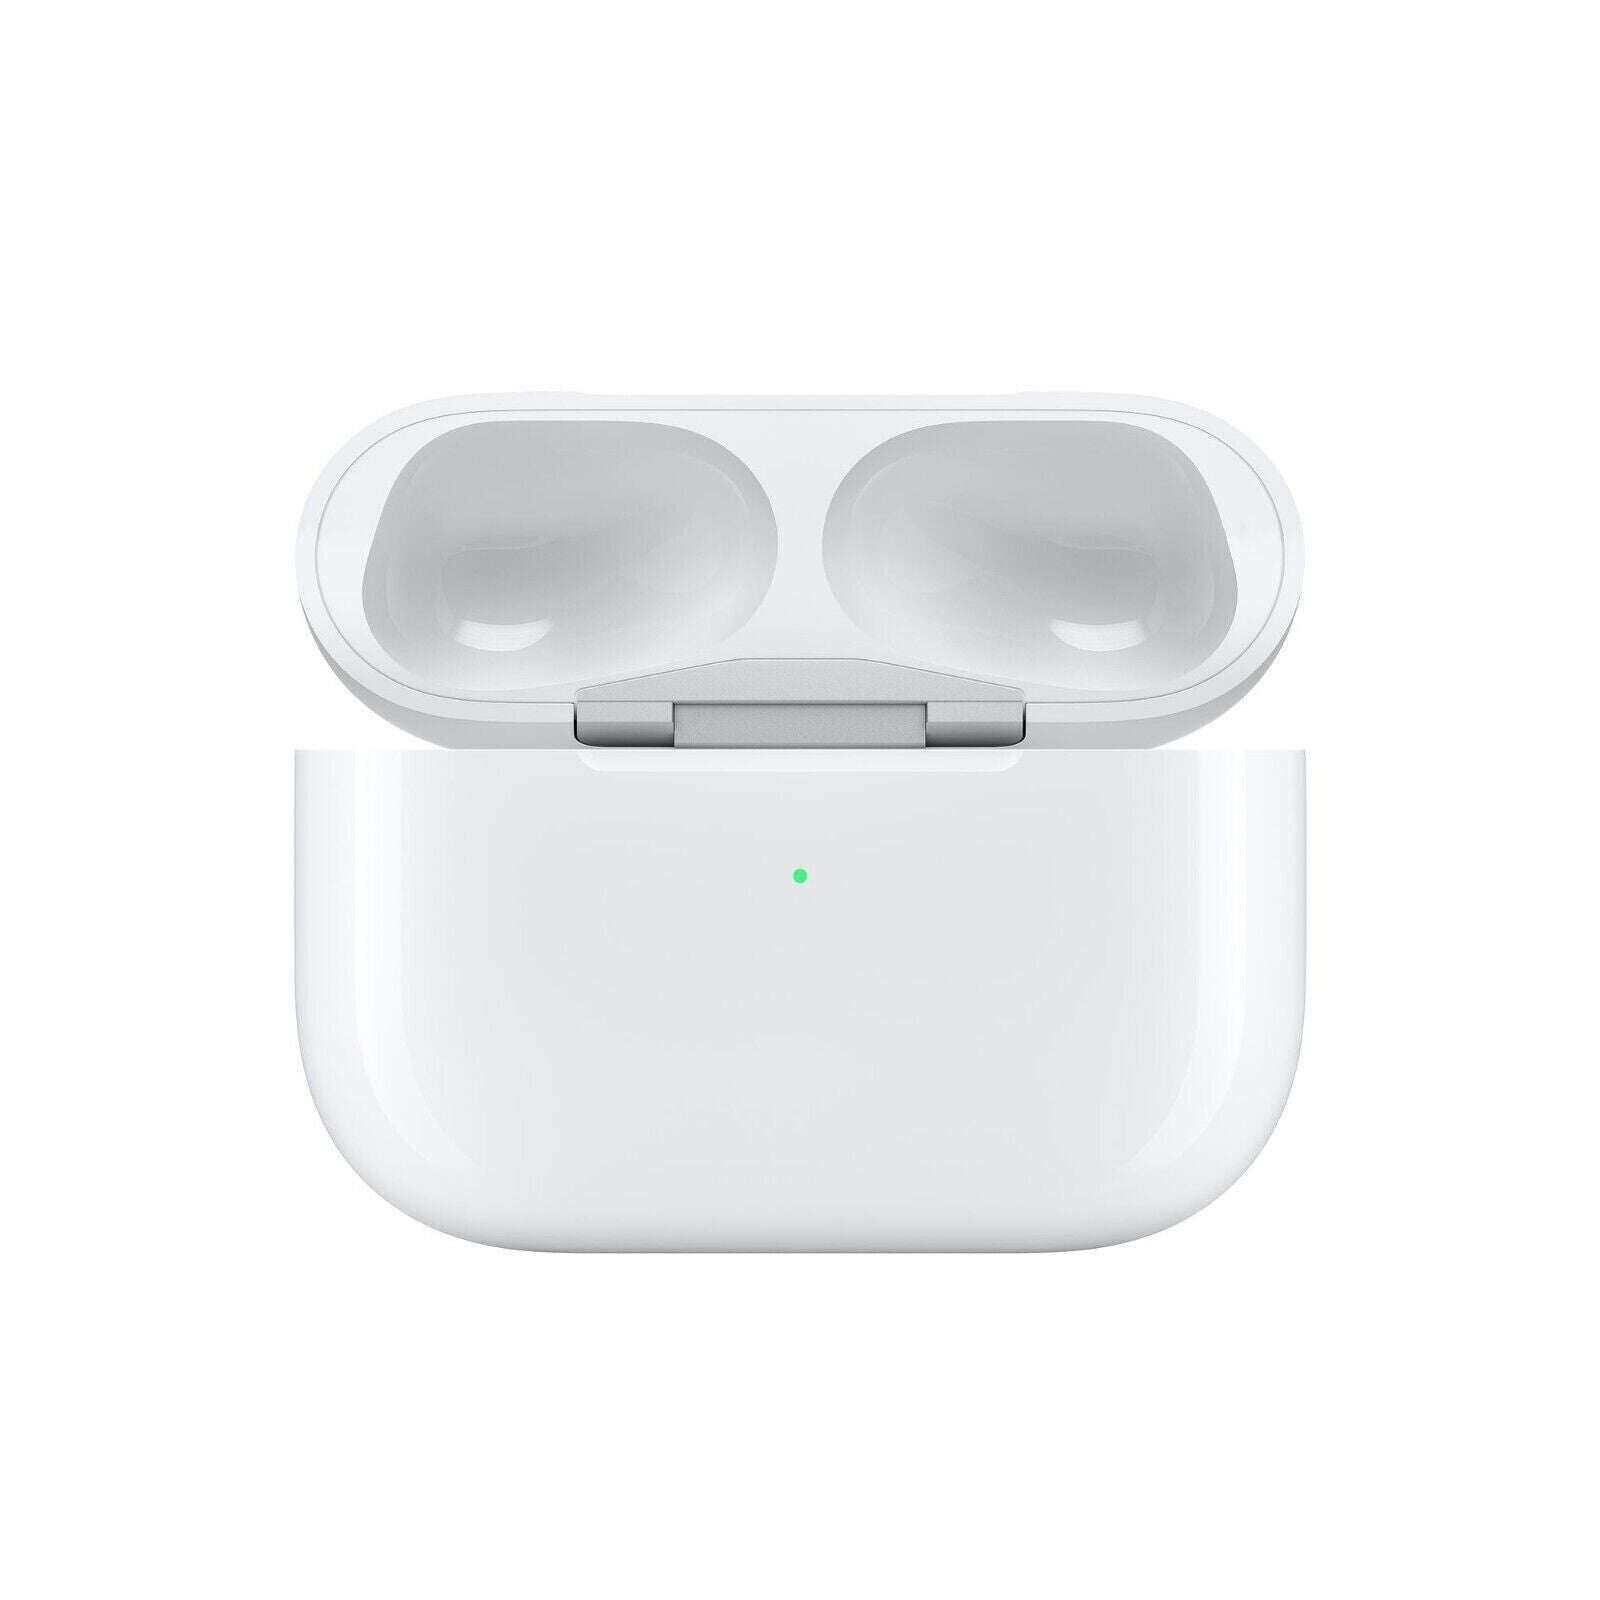 AirPods Pro Case (2nd Generation) | Green